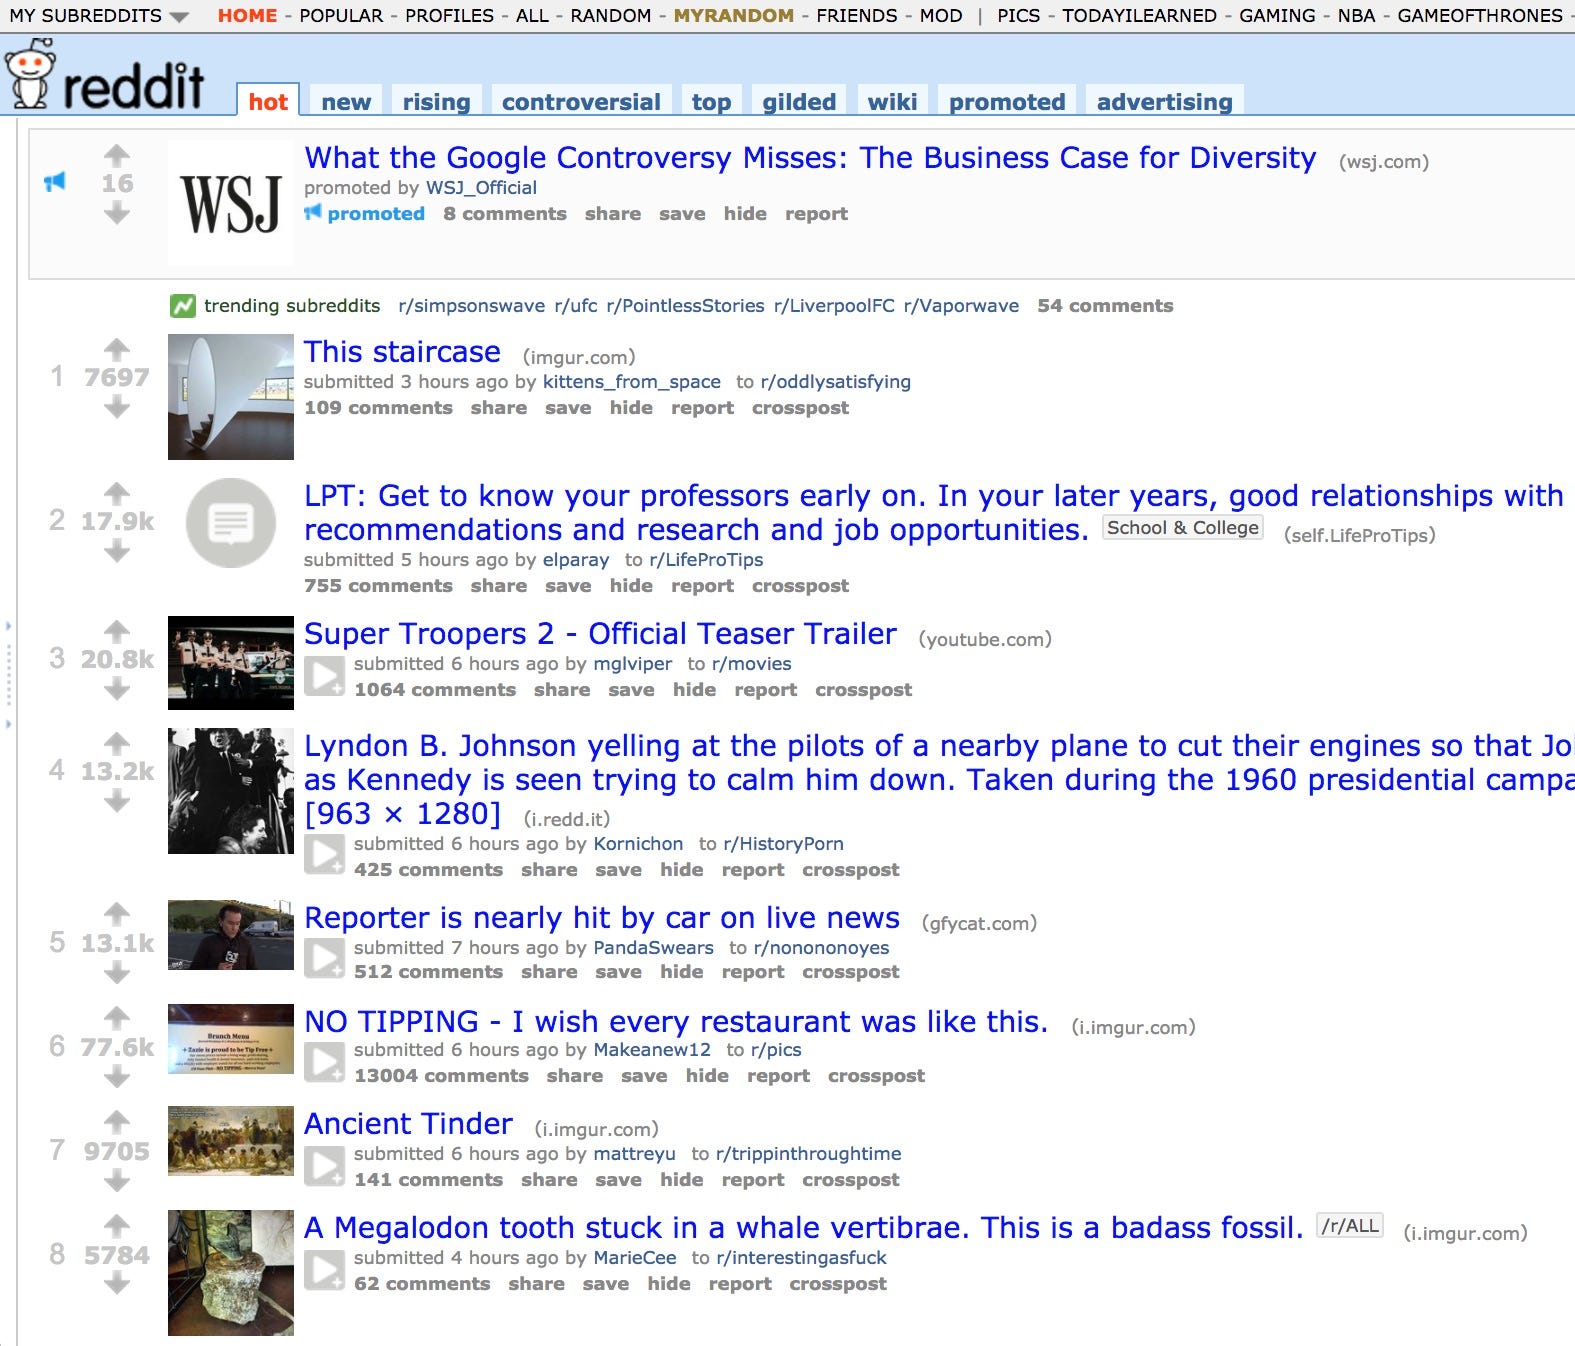 The front page of Reddit's website.